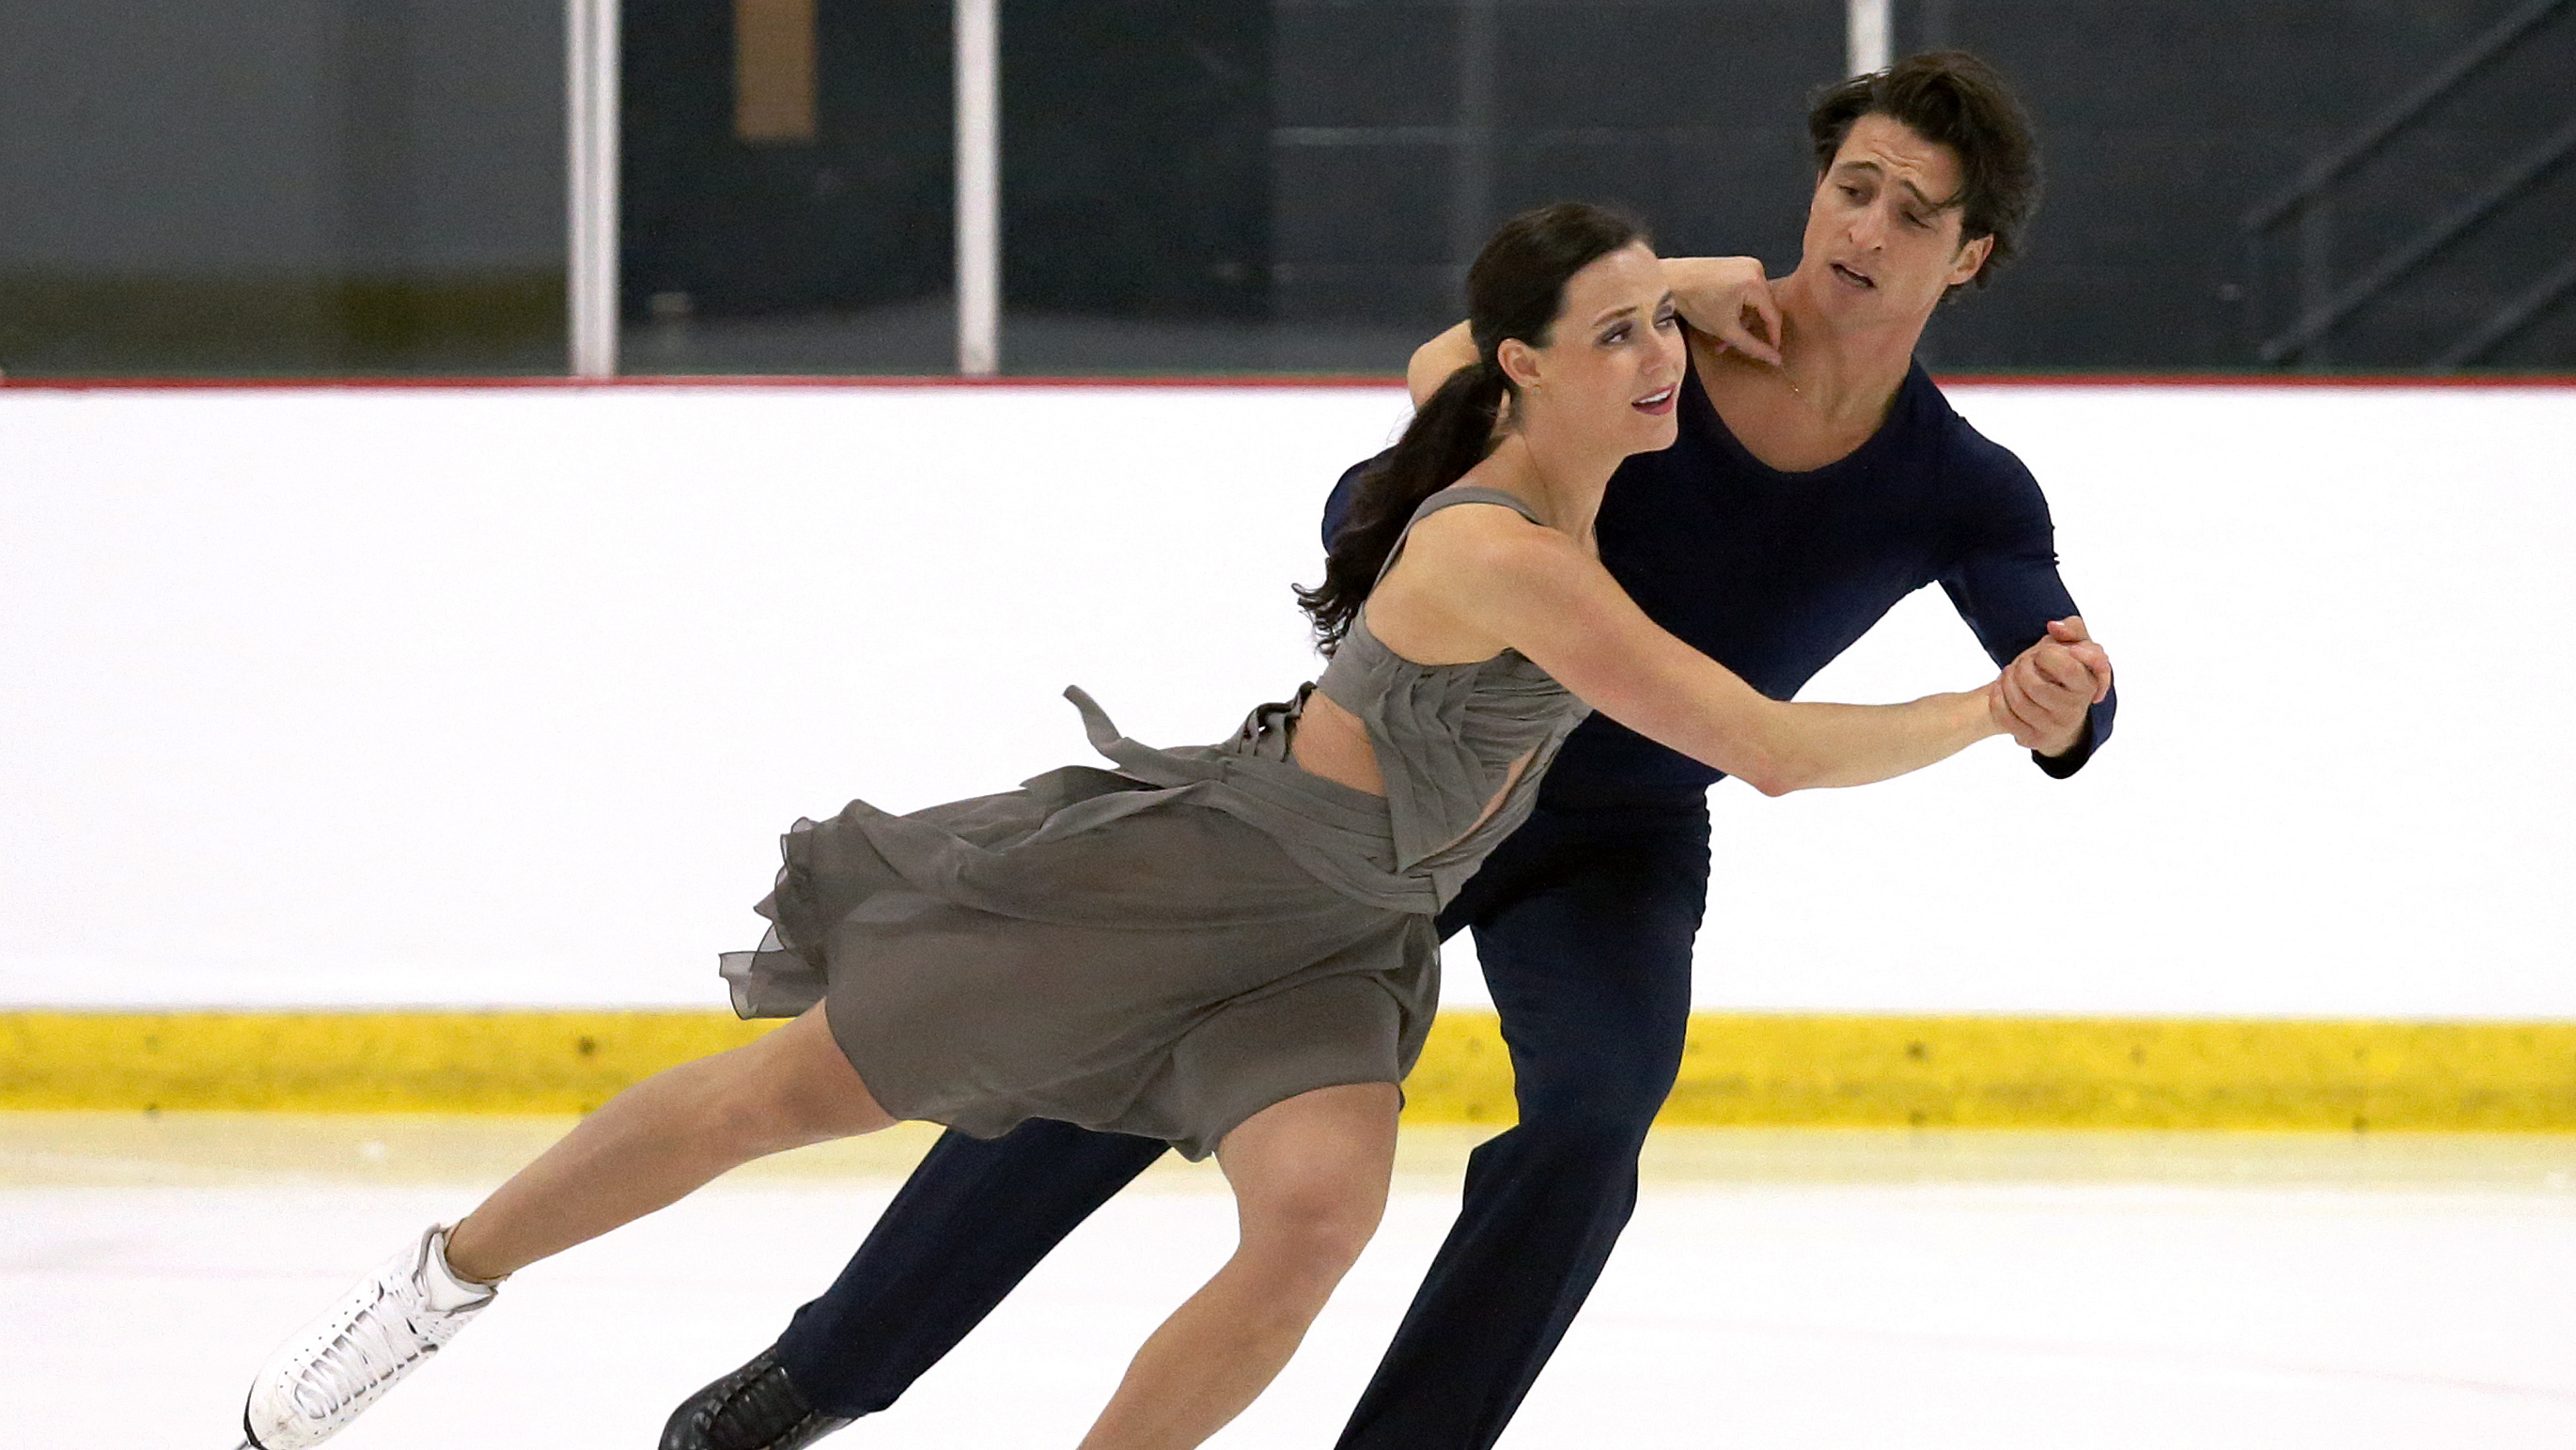 Tessa Virtue and Scott Moir compete in the free dance at the Autumn Classic International on October 1, 2016 (Photo: Greg Kolz)